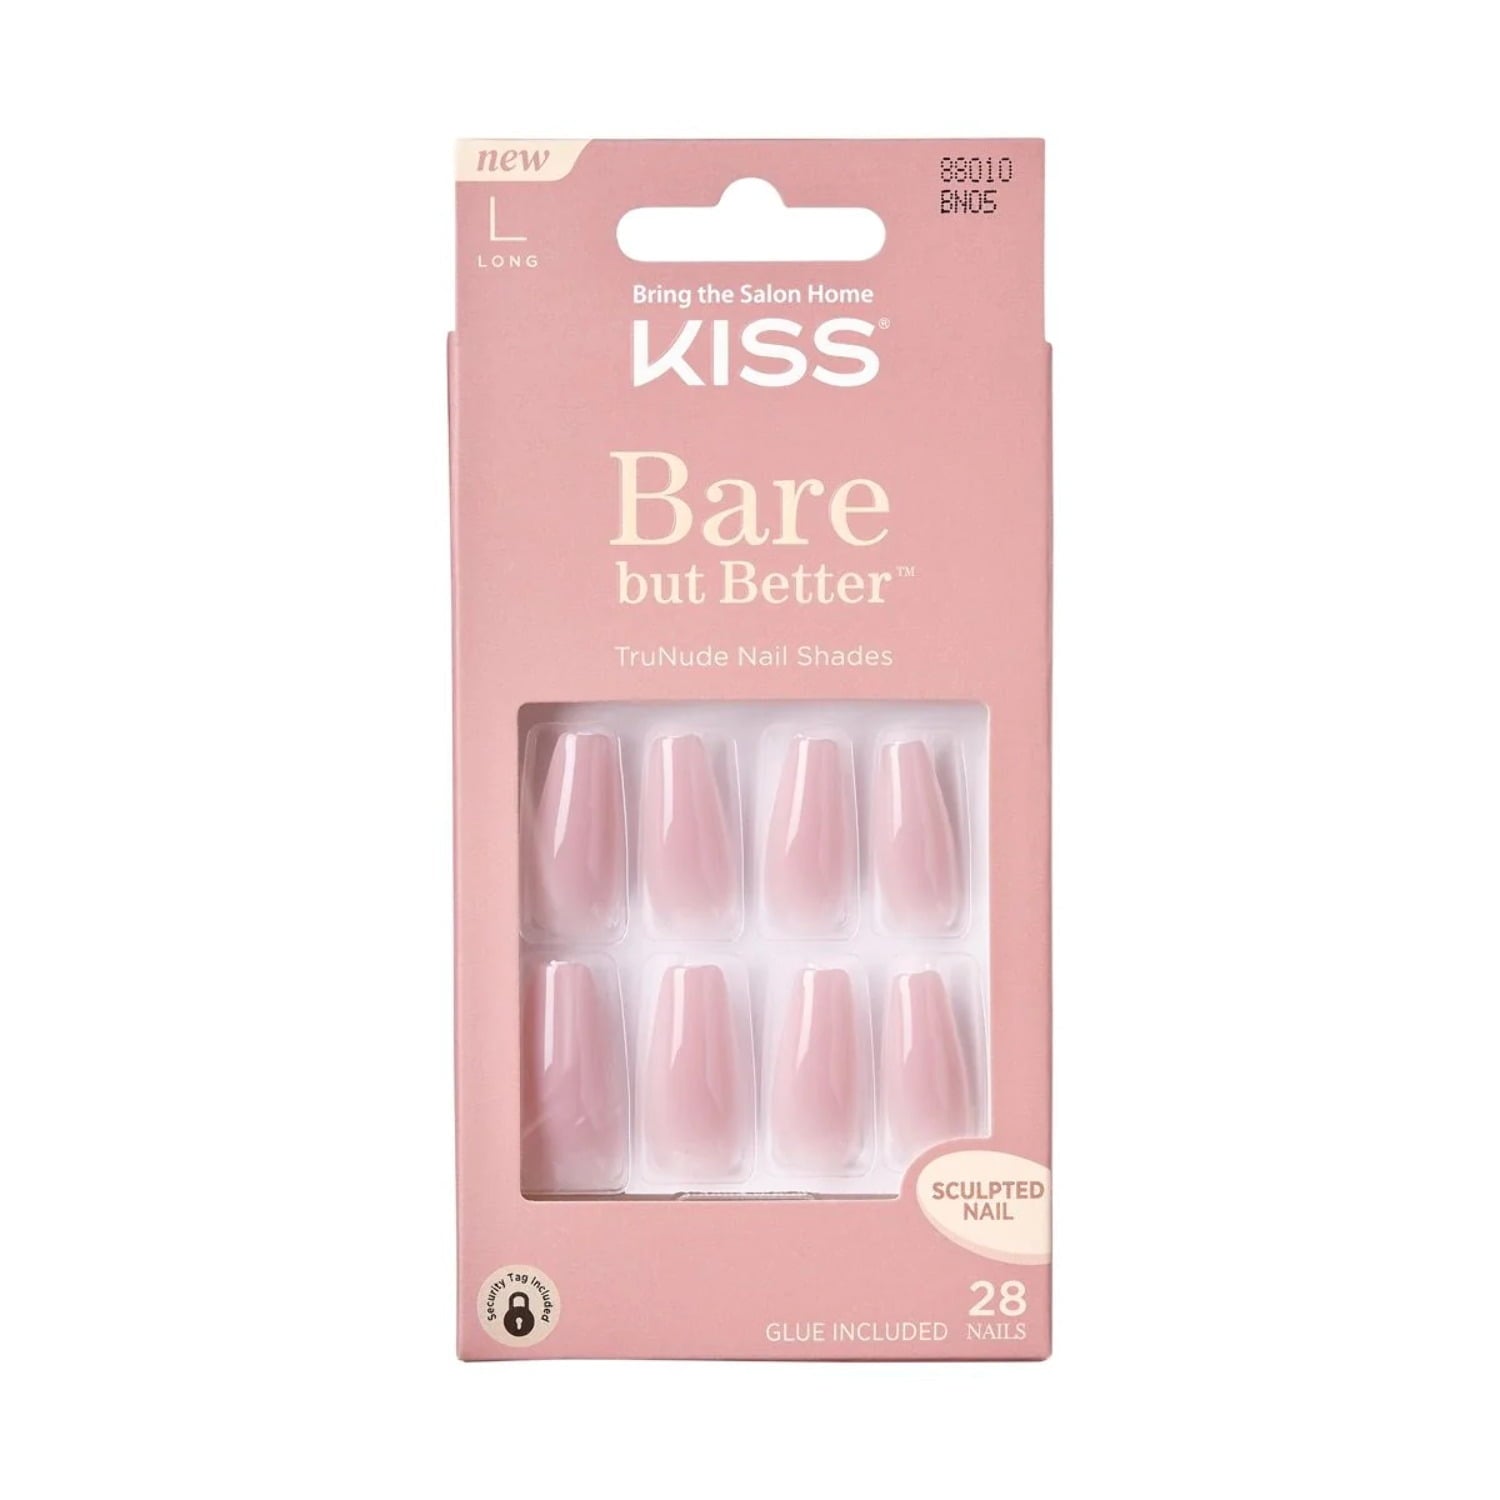 Kiss Bare-But-Better Nails - Berry Nude, 0.07 Oz (BN05)